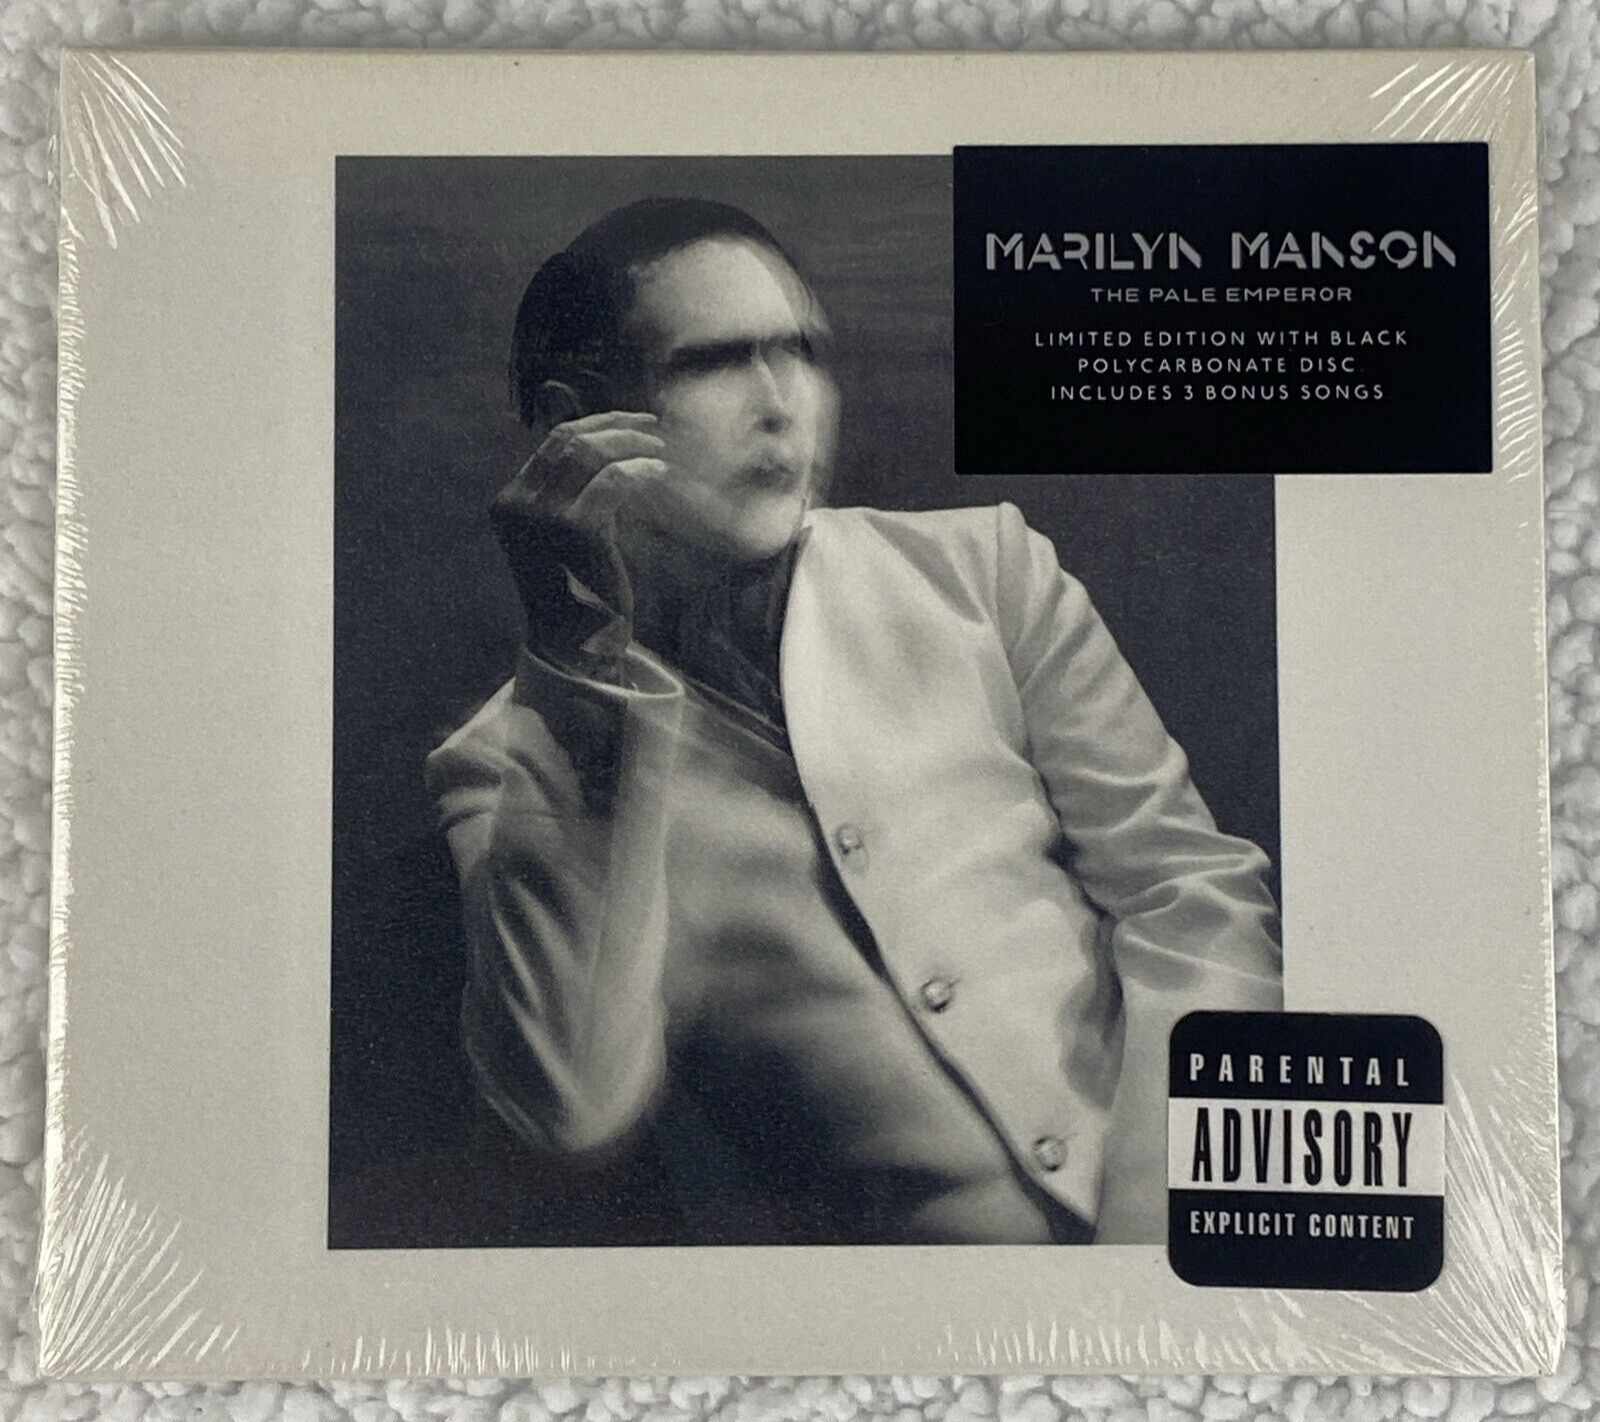 NEW SEALED Marilyn Manson: The Pale Emperor Limited Edition Black Disc Explicit